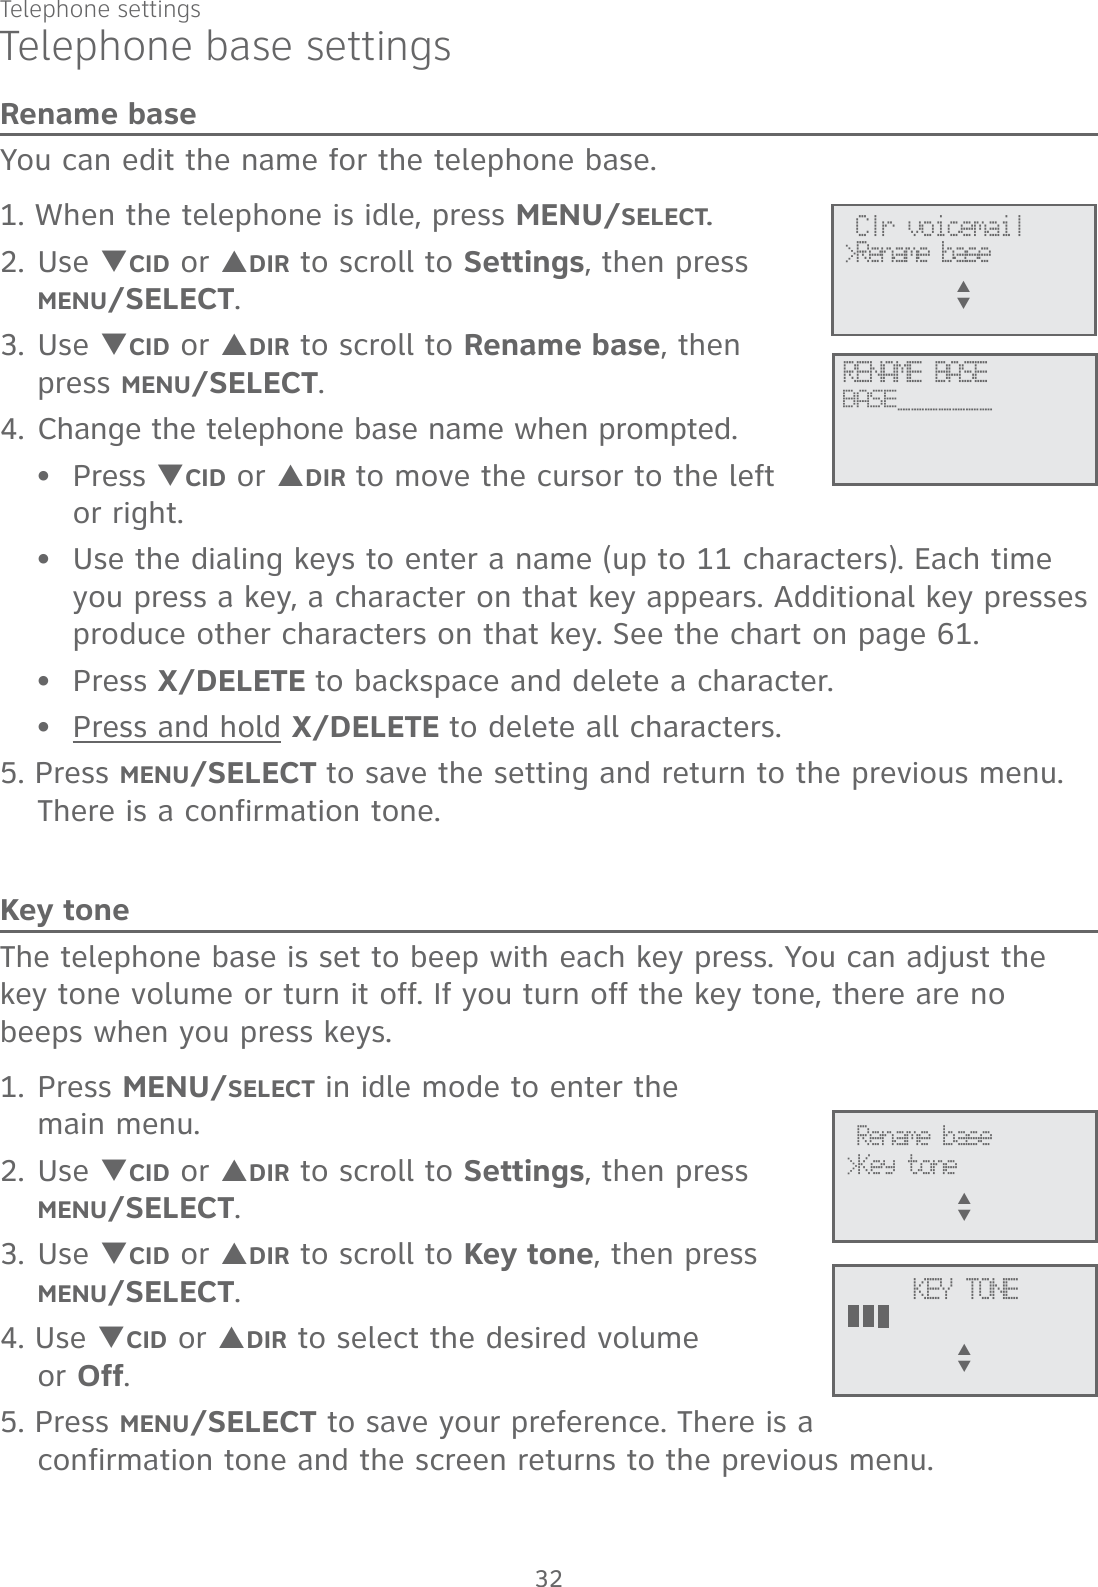 Telephone settings32Telephone base settingsRename baseYou can edit the name for the telephone base.1. When the telephone is idle, press MENU/SELECT.2. Use TCID or SDIR to scroll to Settings, then press  MENU/SELECT.3. Use TCID or SDIR to scroll to Rename base, then  press MENU/SELECT.4. Change the telephone base name when prompted.Press TCID or SDIR to move the cursor to the left  or right.Use the dialing keys to enter a name (up to 11 characters). Each time you press a key, a character on that key appears. Additional key presses produce other characters on that key. See the chart on page 61.Press X/DELETE to backspace and delete a character.Press and hold X/DELETE to delete all characters.5. Press MENU/SELECT to save the setting and return to the previous menu. There is a confirmation tone.Key toneThe telephone base is set to beep with each key press. You can adjust the key tone volume or turn it off. If you turn off the key tone, there are no beeps when you press keys. 1. Press MENU/SELECT in idle mode to enter the  main menu.2. Use TCID or SDIR to scroll to Settings, then press  MENU/SELECT.3. Use TCID or SDIR to scroll to Key tone, then press  MENU/SELECT.4. Use TCID or SDIR to select the desired volume  or Off.5. Press MENU/SELECT to save your preference. There is a confirmation tone and the screen returns to the previous menu.••••Rename base&gt;Key toneS      TKEY TONES      T Clr voicemail&gt;Rename baseS      TRENAME BASEBASE_______